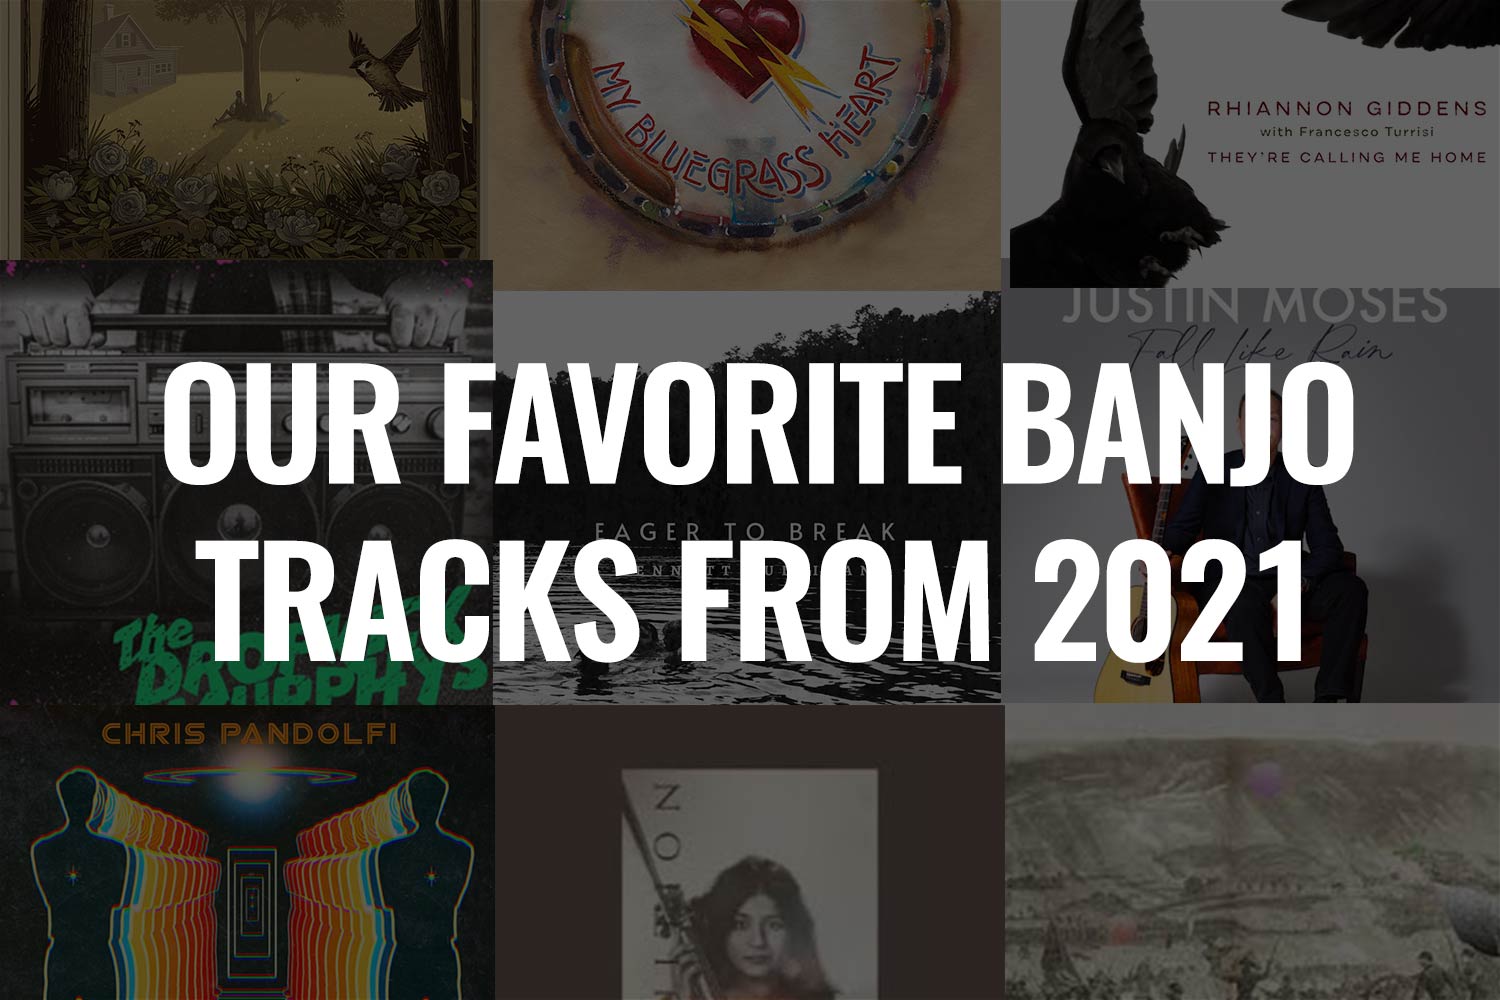 Our Favorite Banjo Albums From 2021